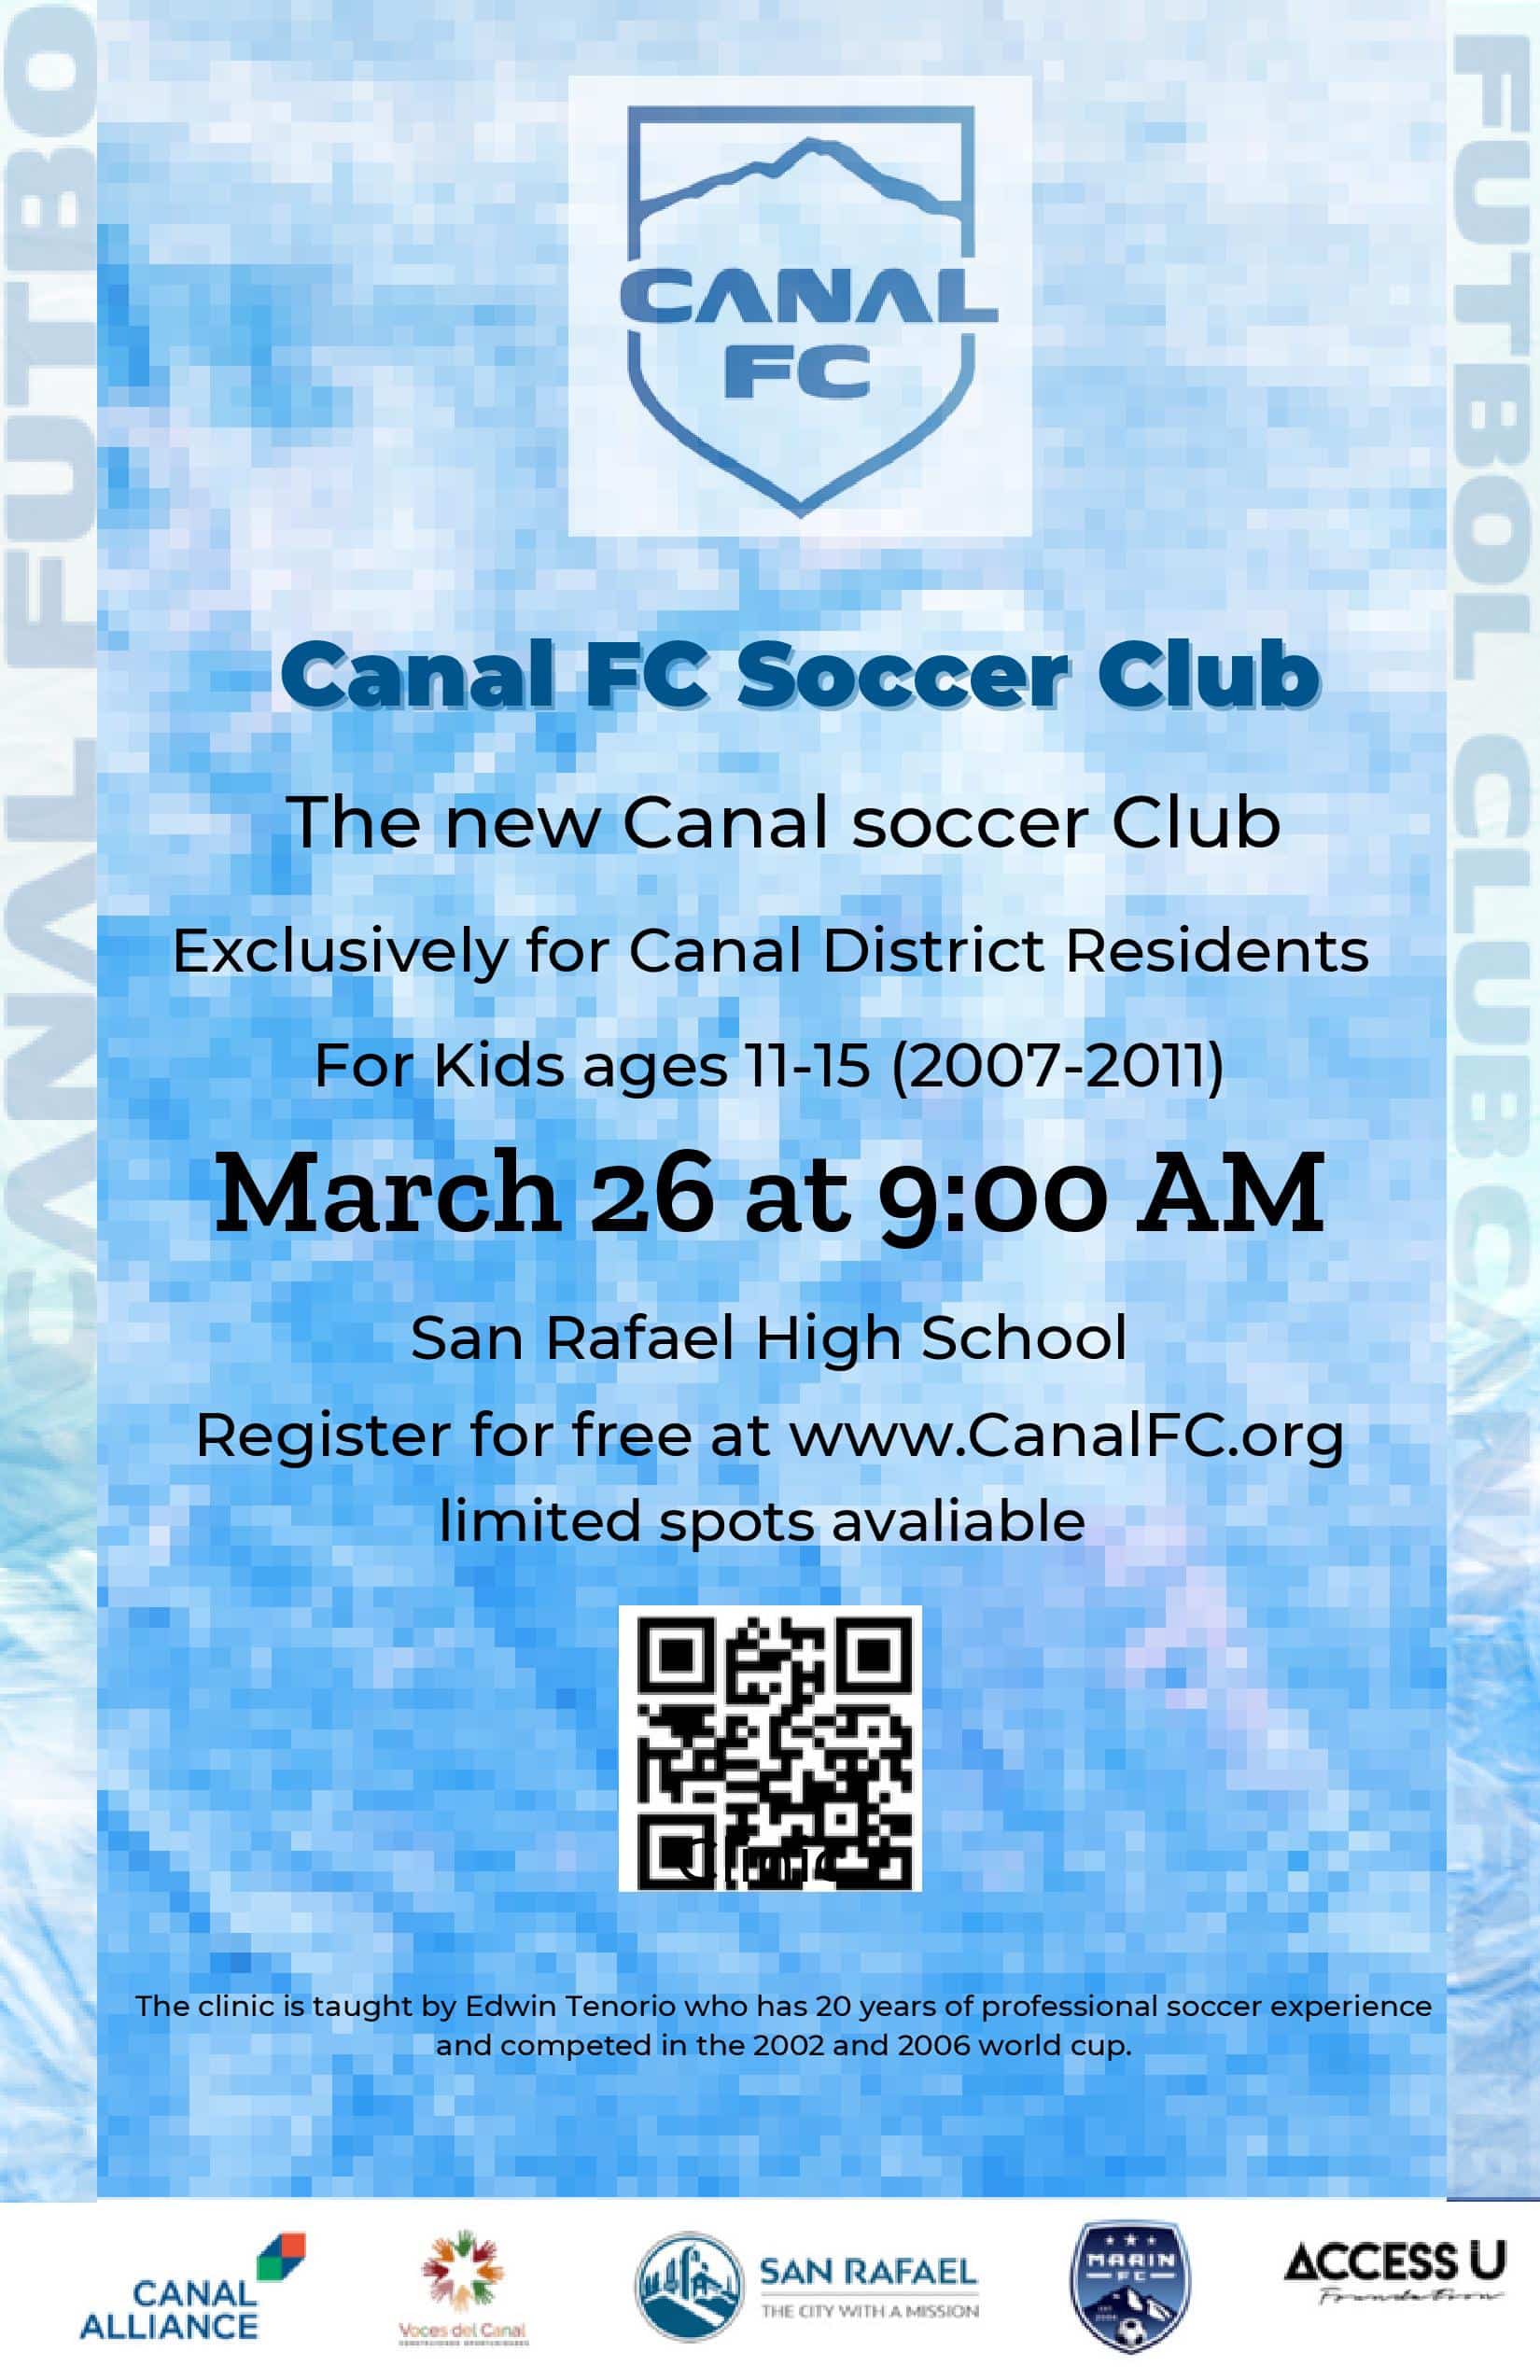 Flyer for Canal FC soccer club